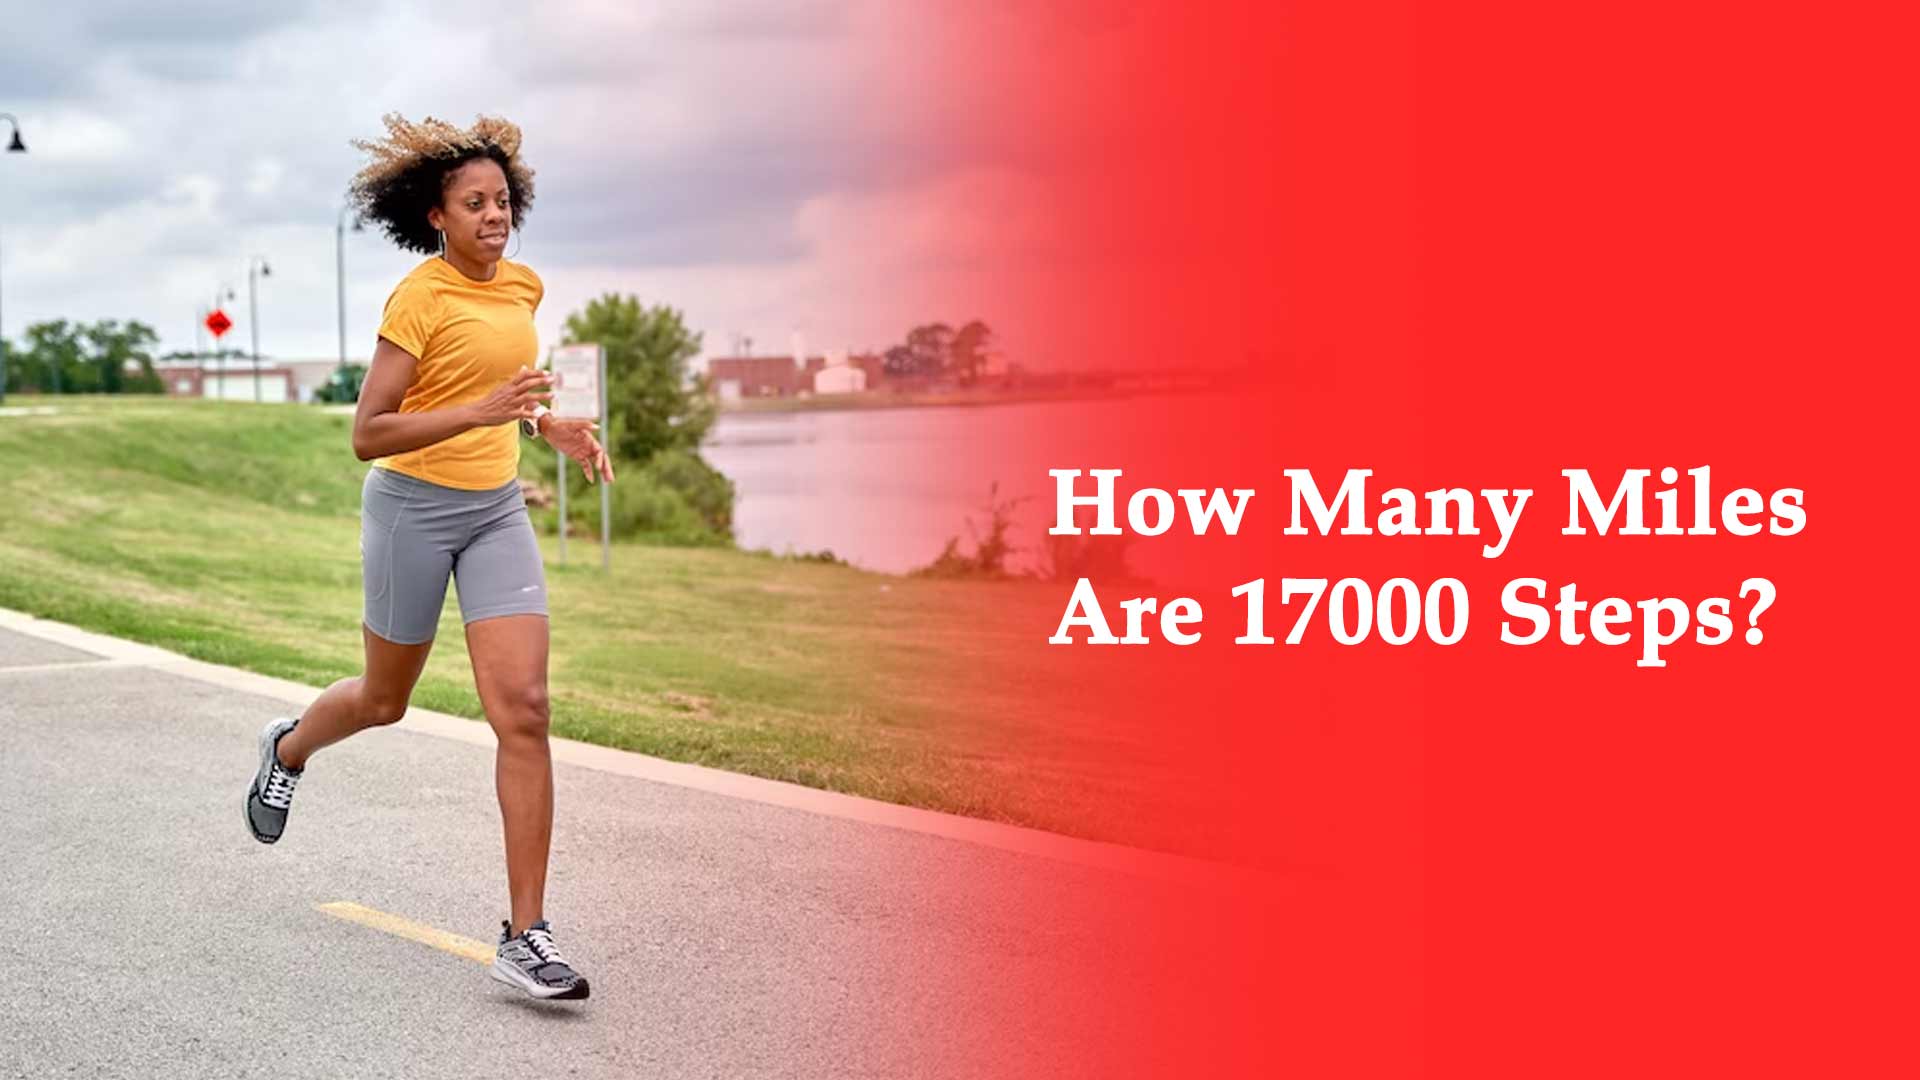 How Many Miles Are 17000 Steps - Everything Covered that You Need